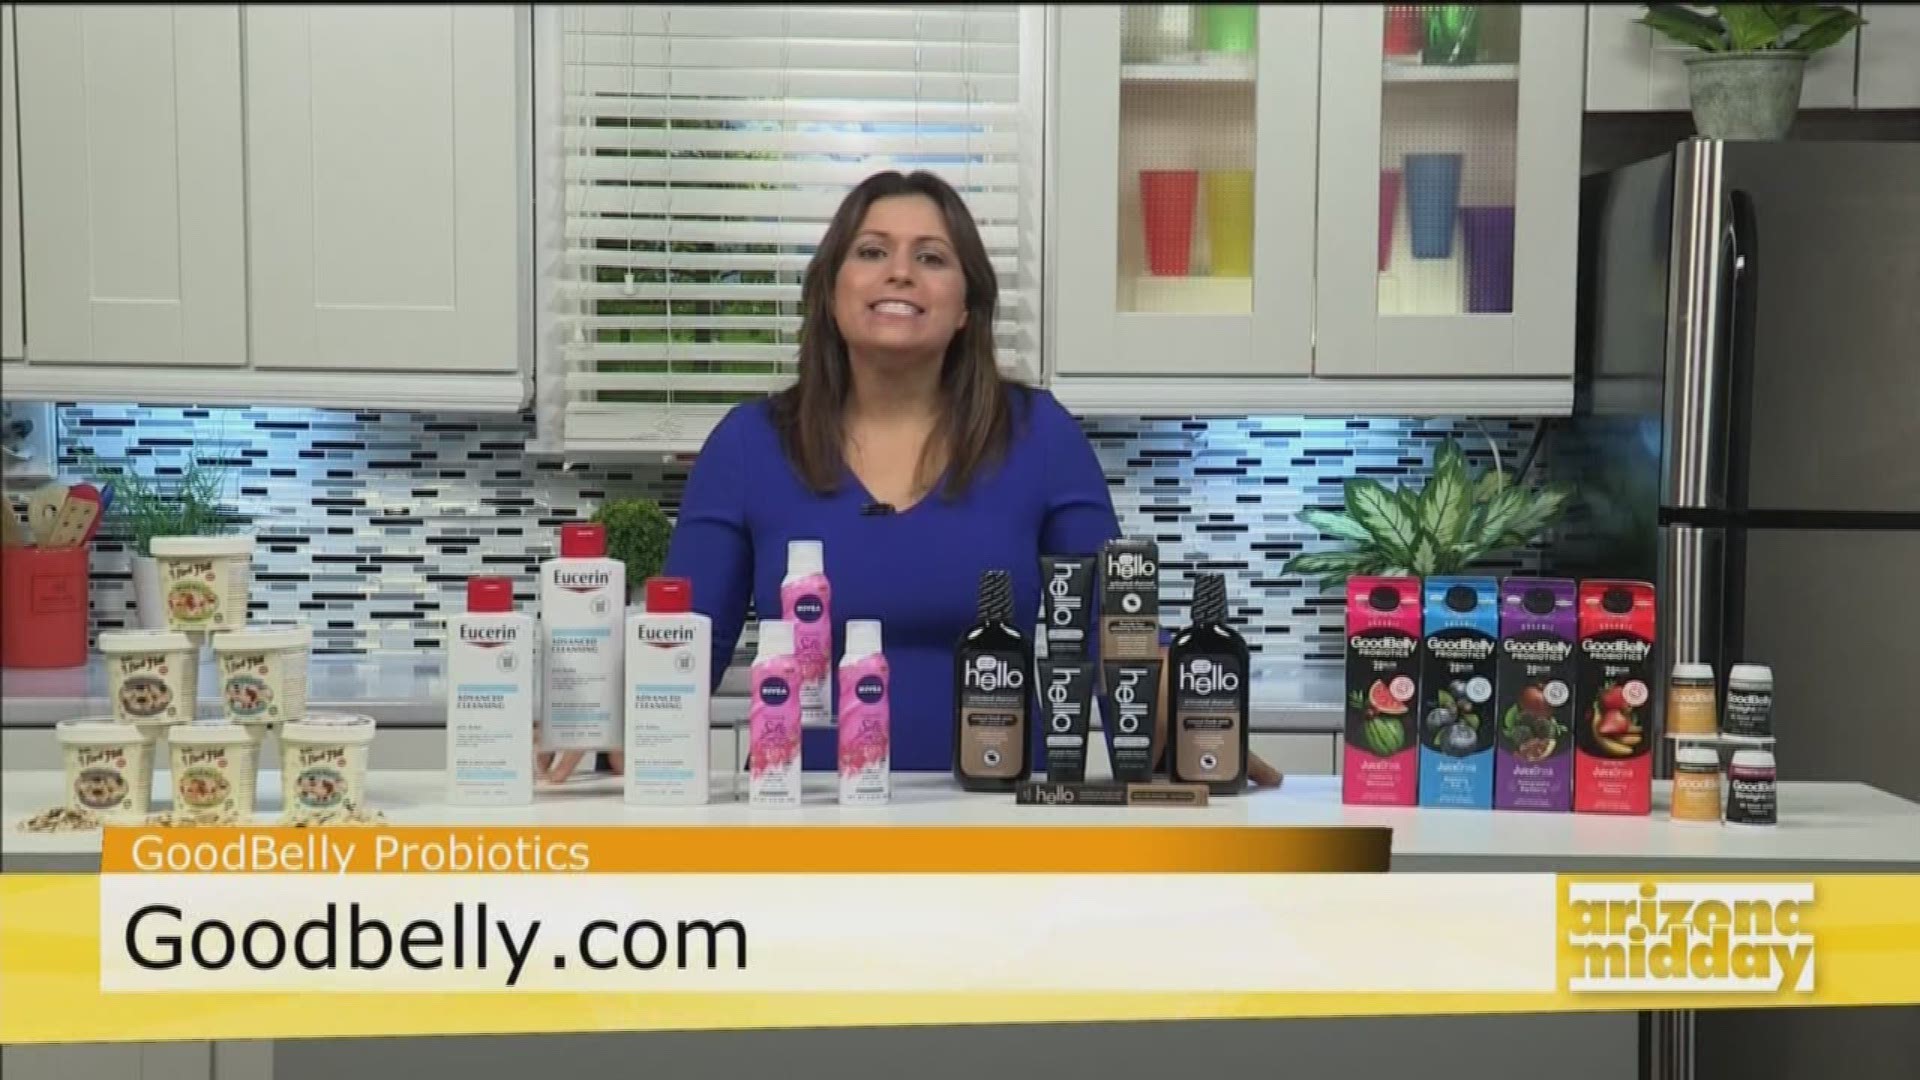 We've got tips for getting your family up and ready in the morning from Lifestyle expert Limor Suss.